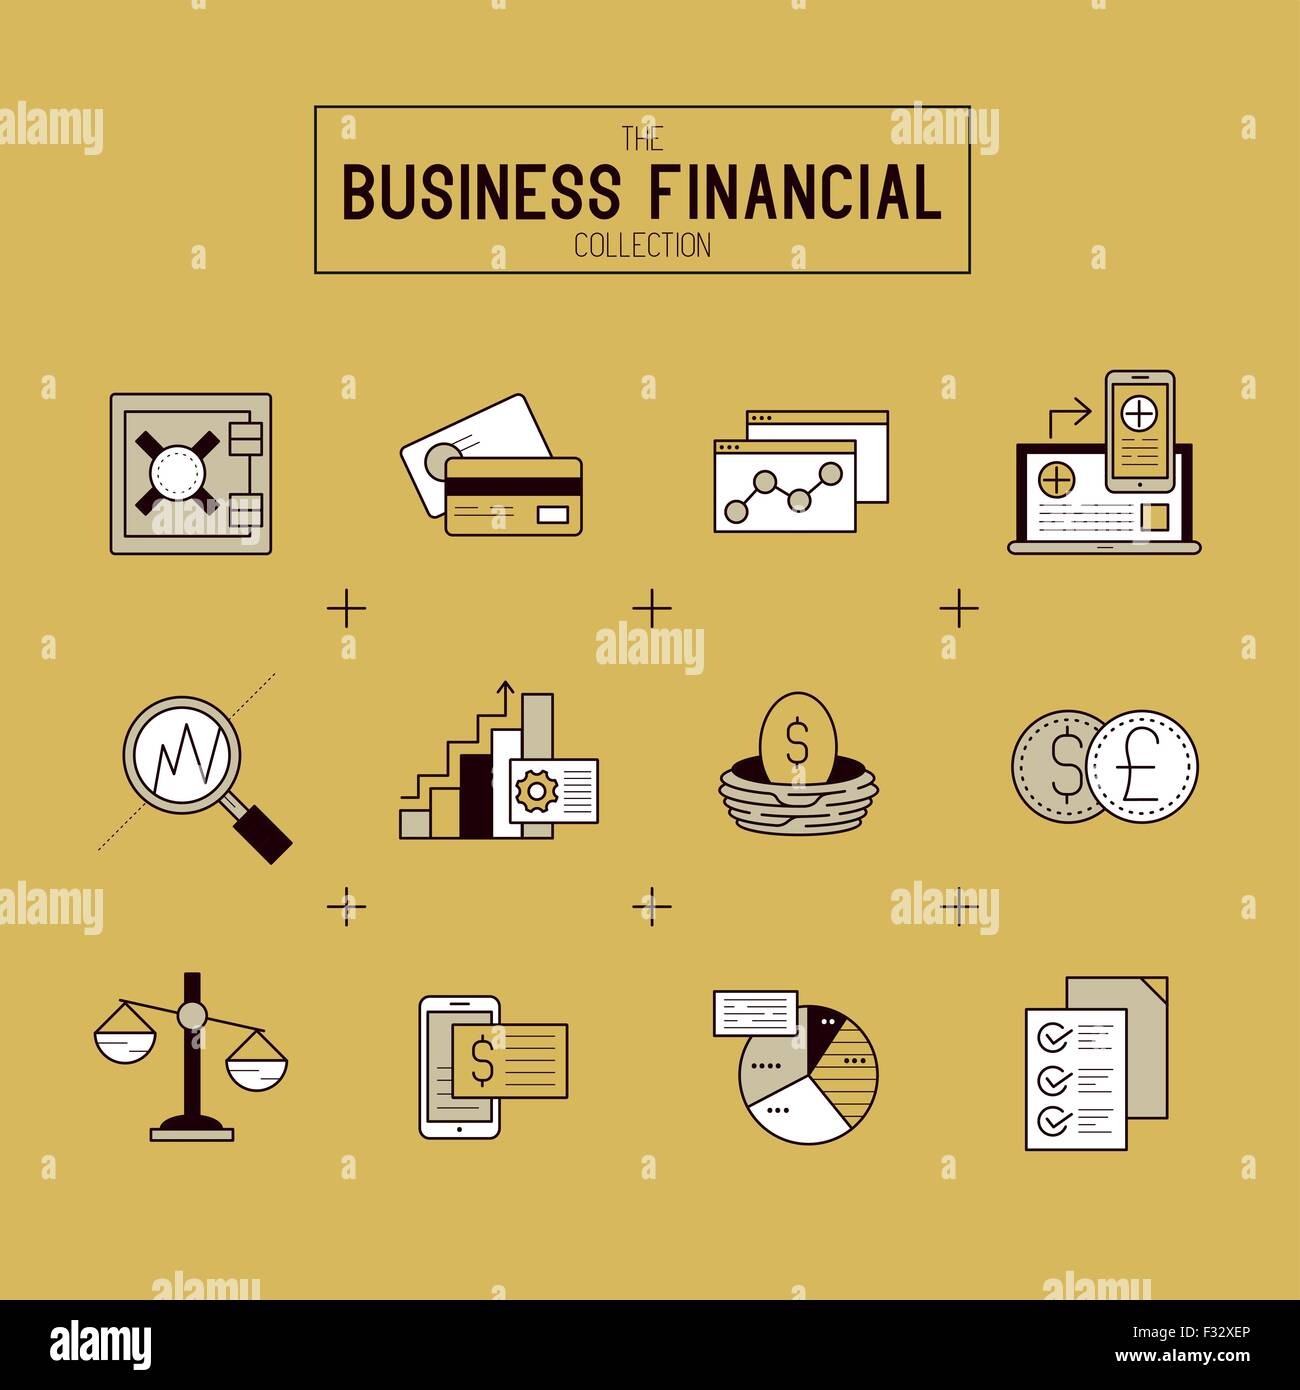 Business Financial Icon Set. A collection of gold financial icons including market tools, bar charts and currency exchange. Stock Vector